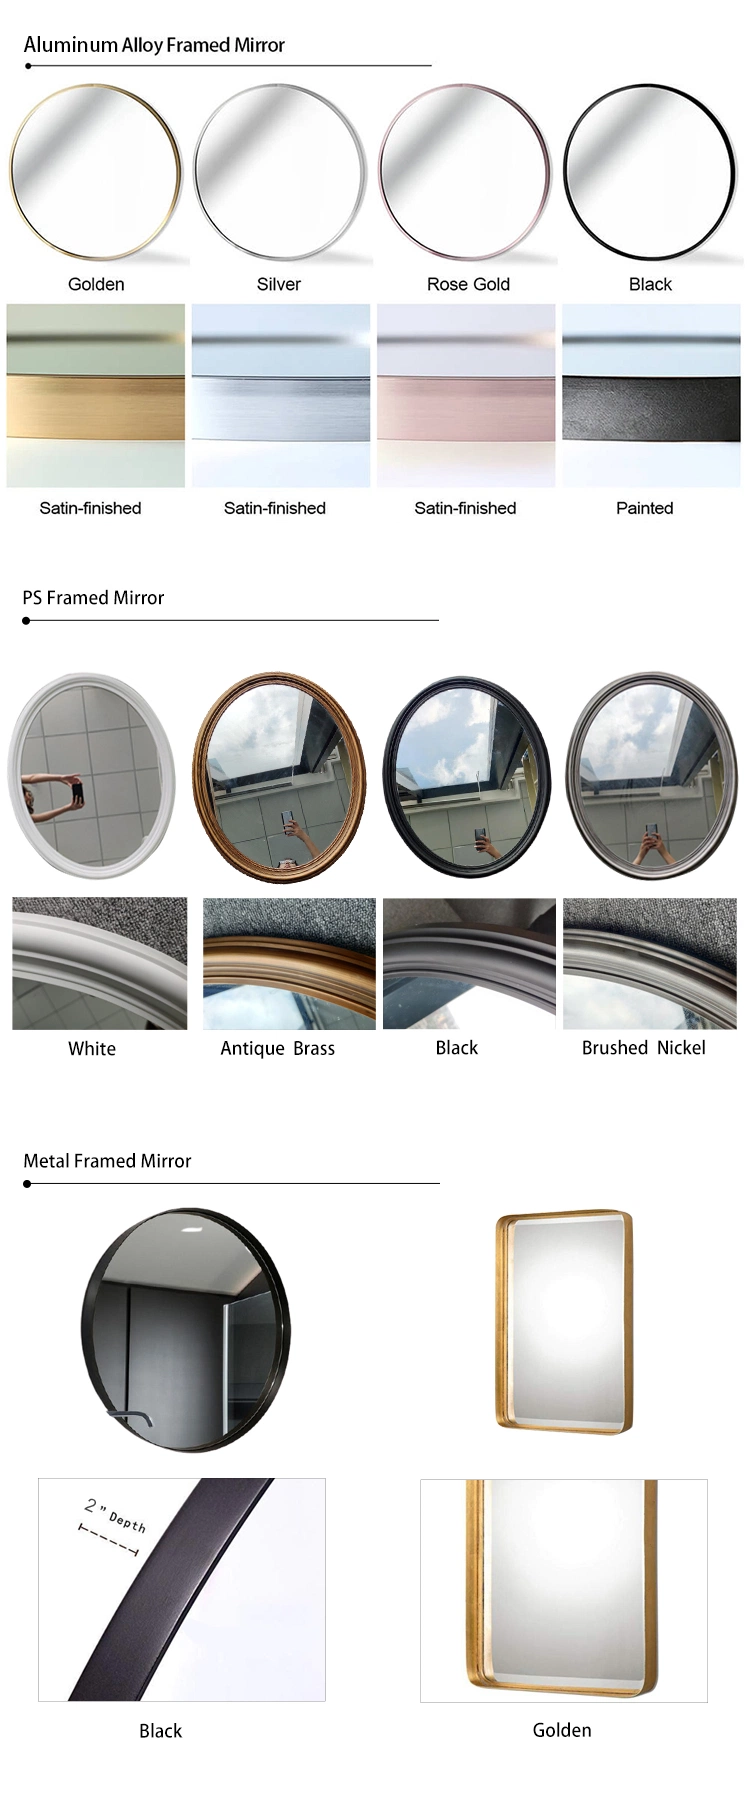 Factory Price Frame Frameless Arched Rectangle Round Shape Metal Wall Makeup LED Mirror Horizontal/Vertical Bathroom Living Room Furniture Beveled Mirror